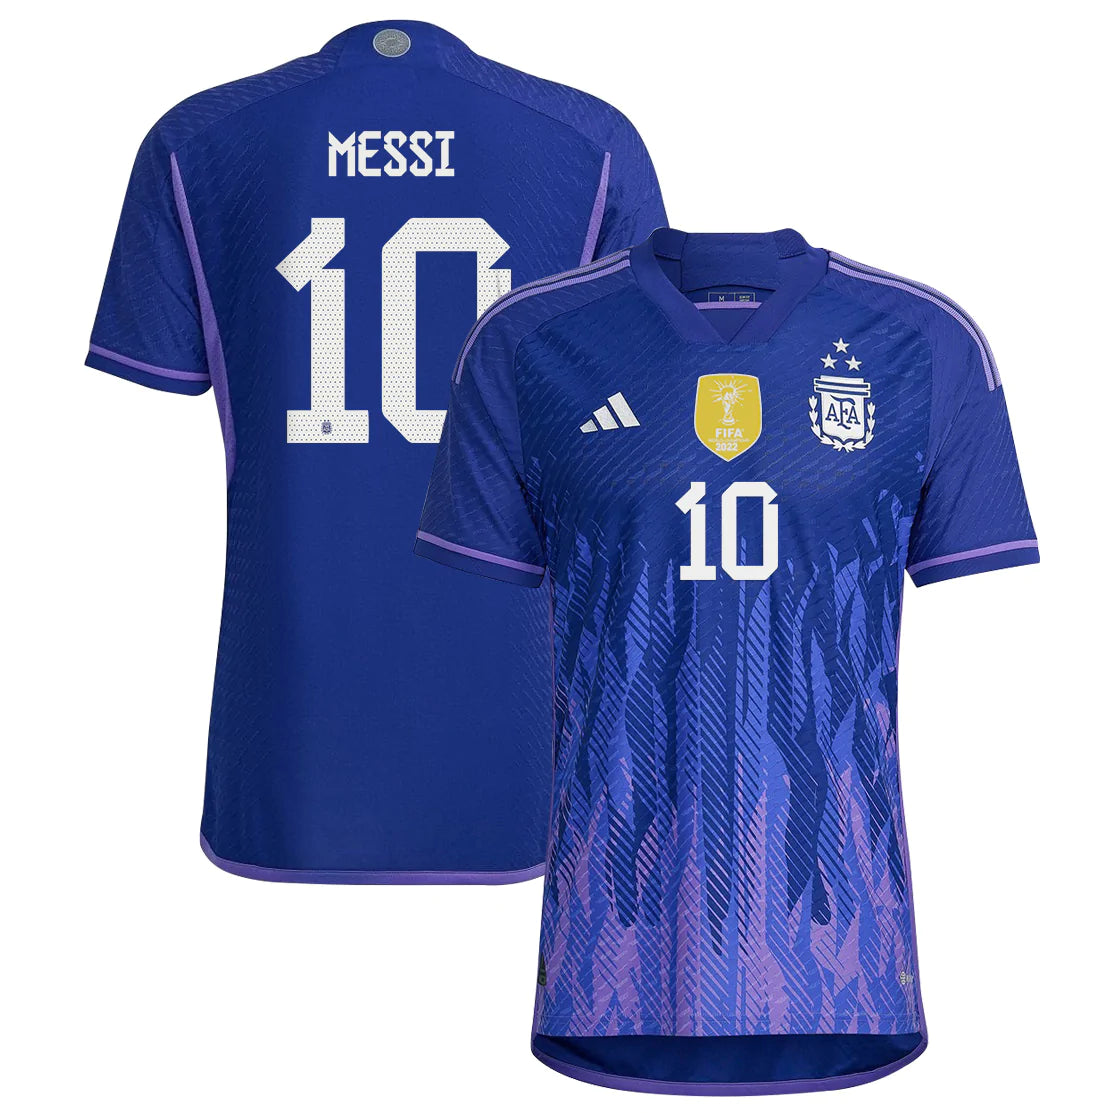 Messi Argentina 10 FIFA World Cup Jersey